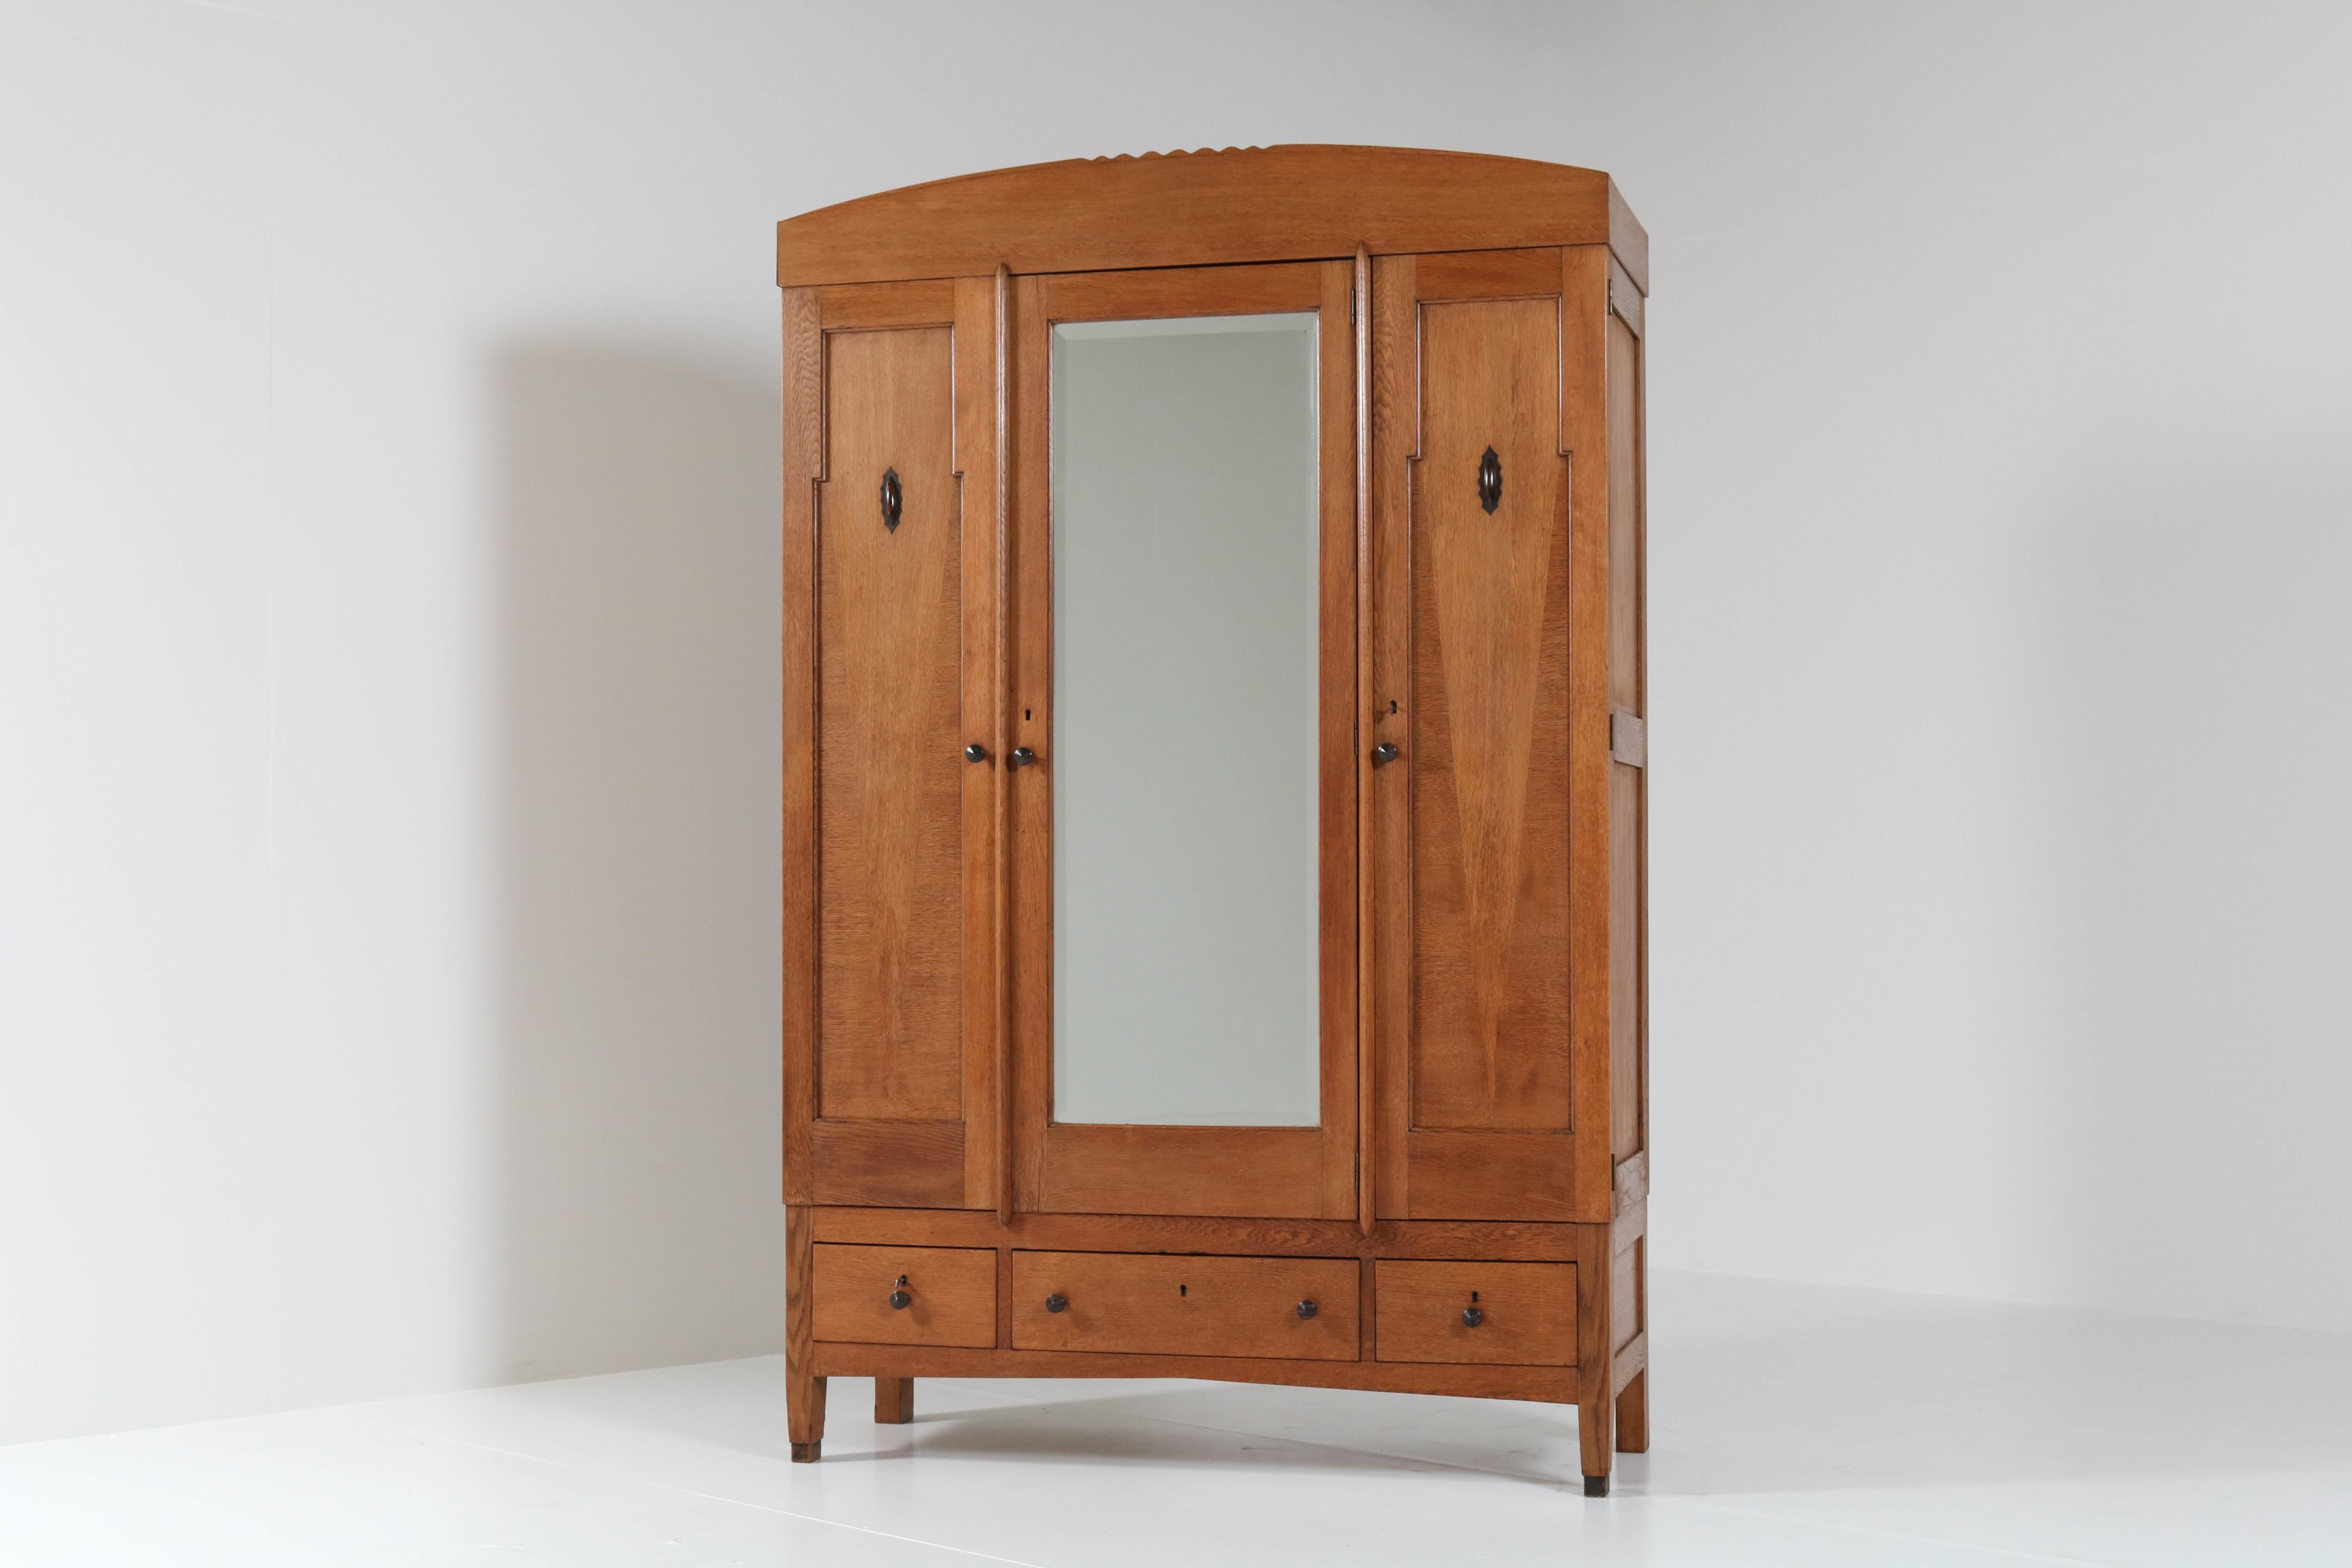 Wonderful and rare Art Deco Amsterdam School armoir or wardrobe.
Striking Dutch design from the twenties.
Solid oak with solid Macassar ebony knobs on doors and drawers.
This armoir with the original bevelled mirror can be dismantled for easy